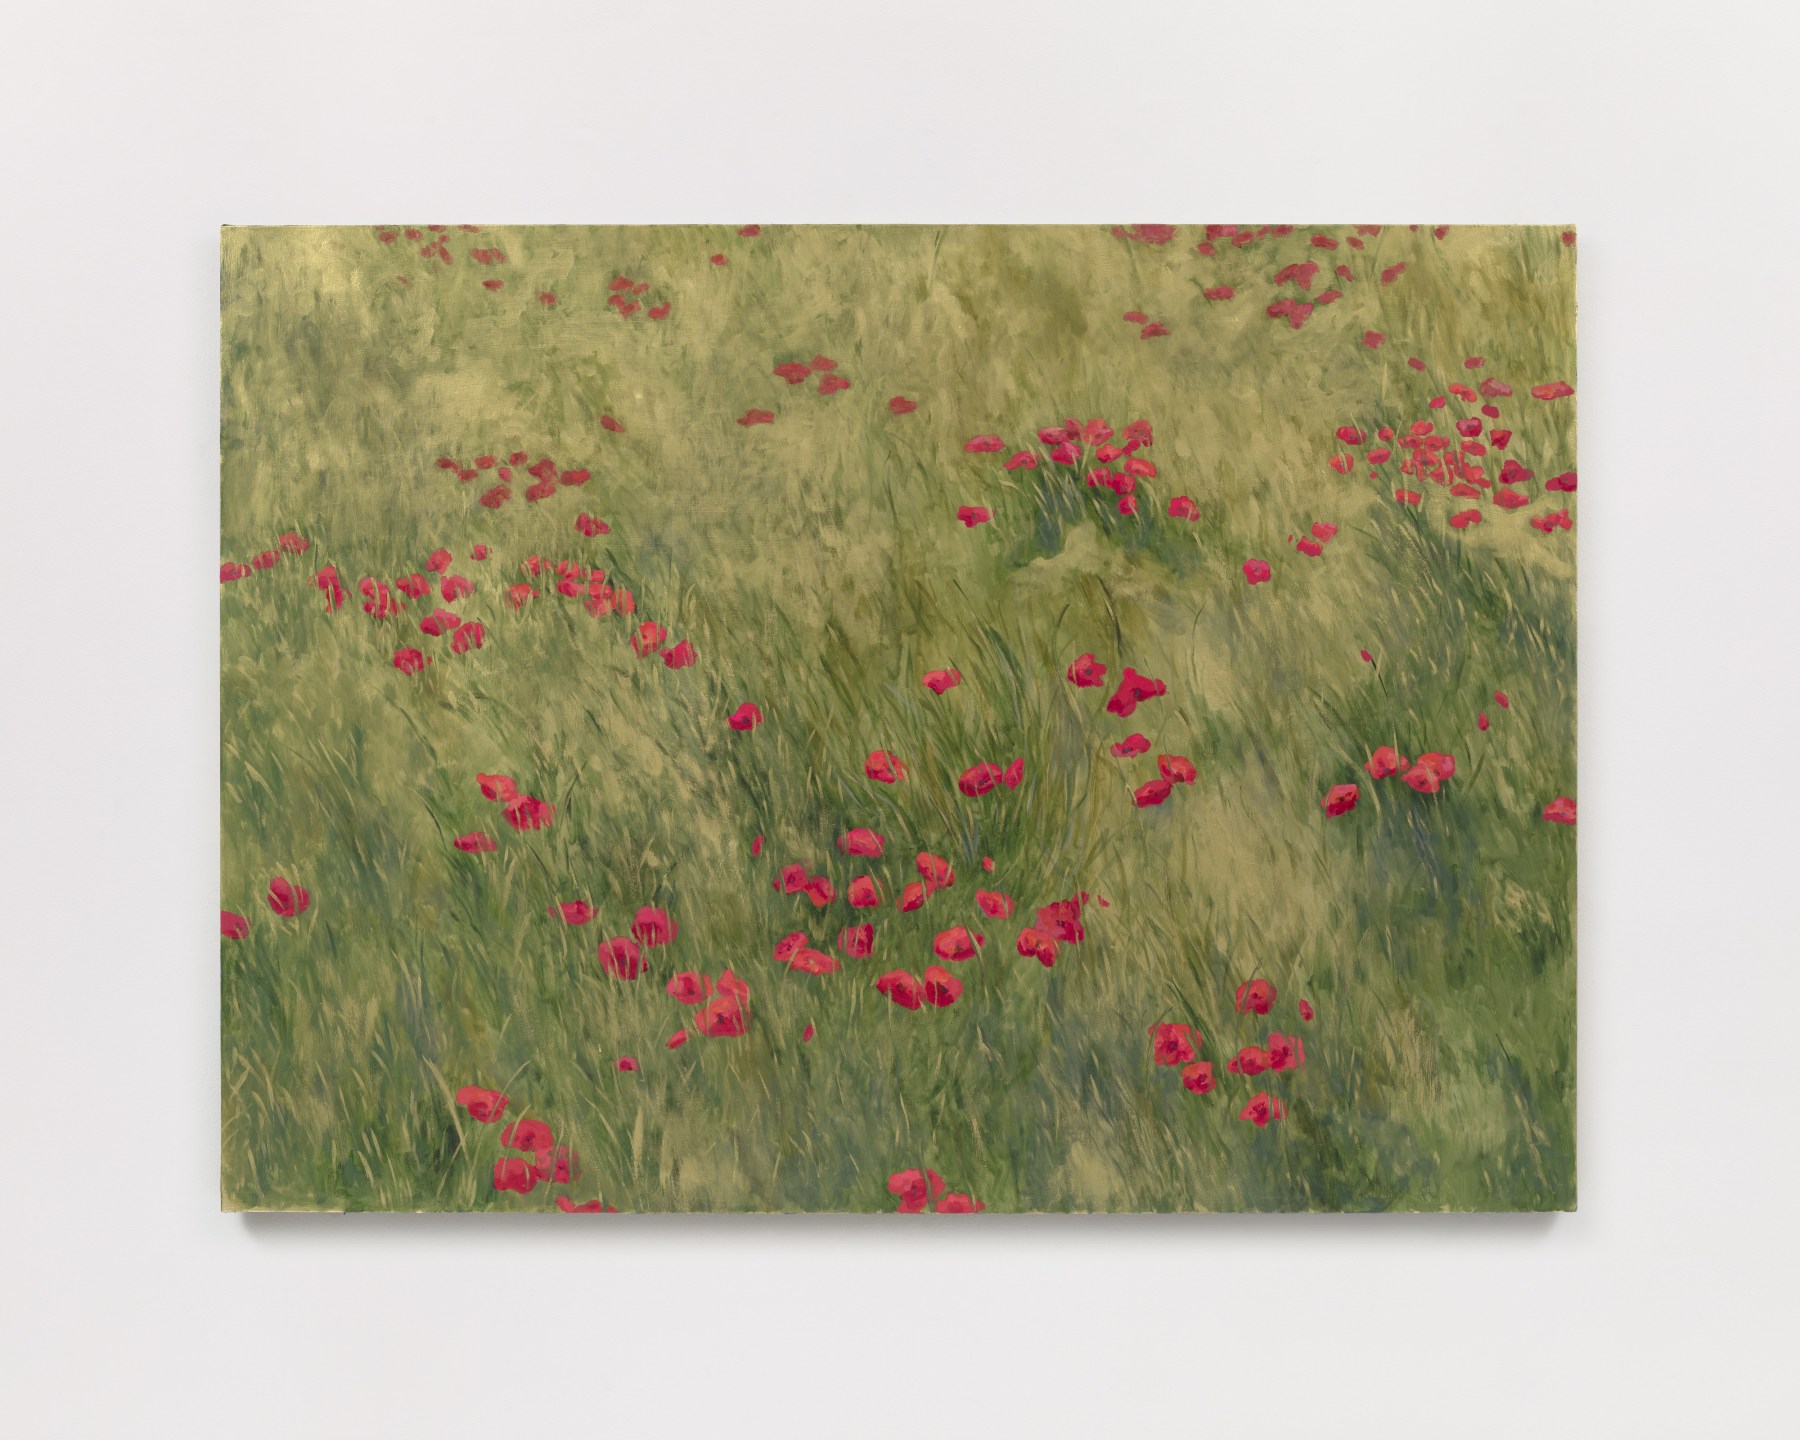 A painting of red poppies in a light green field